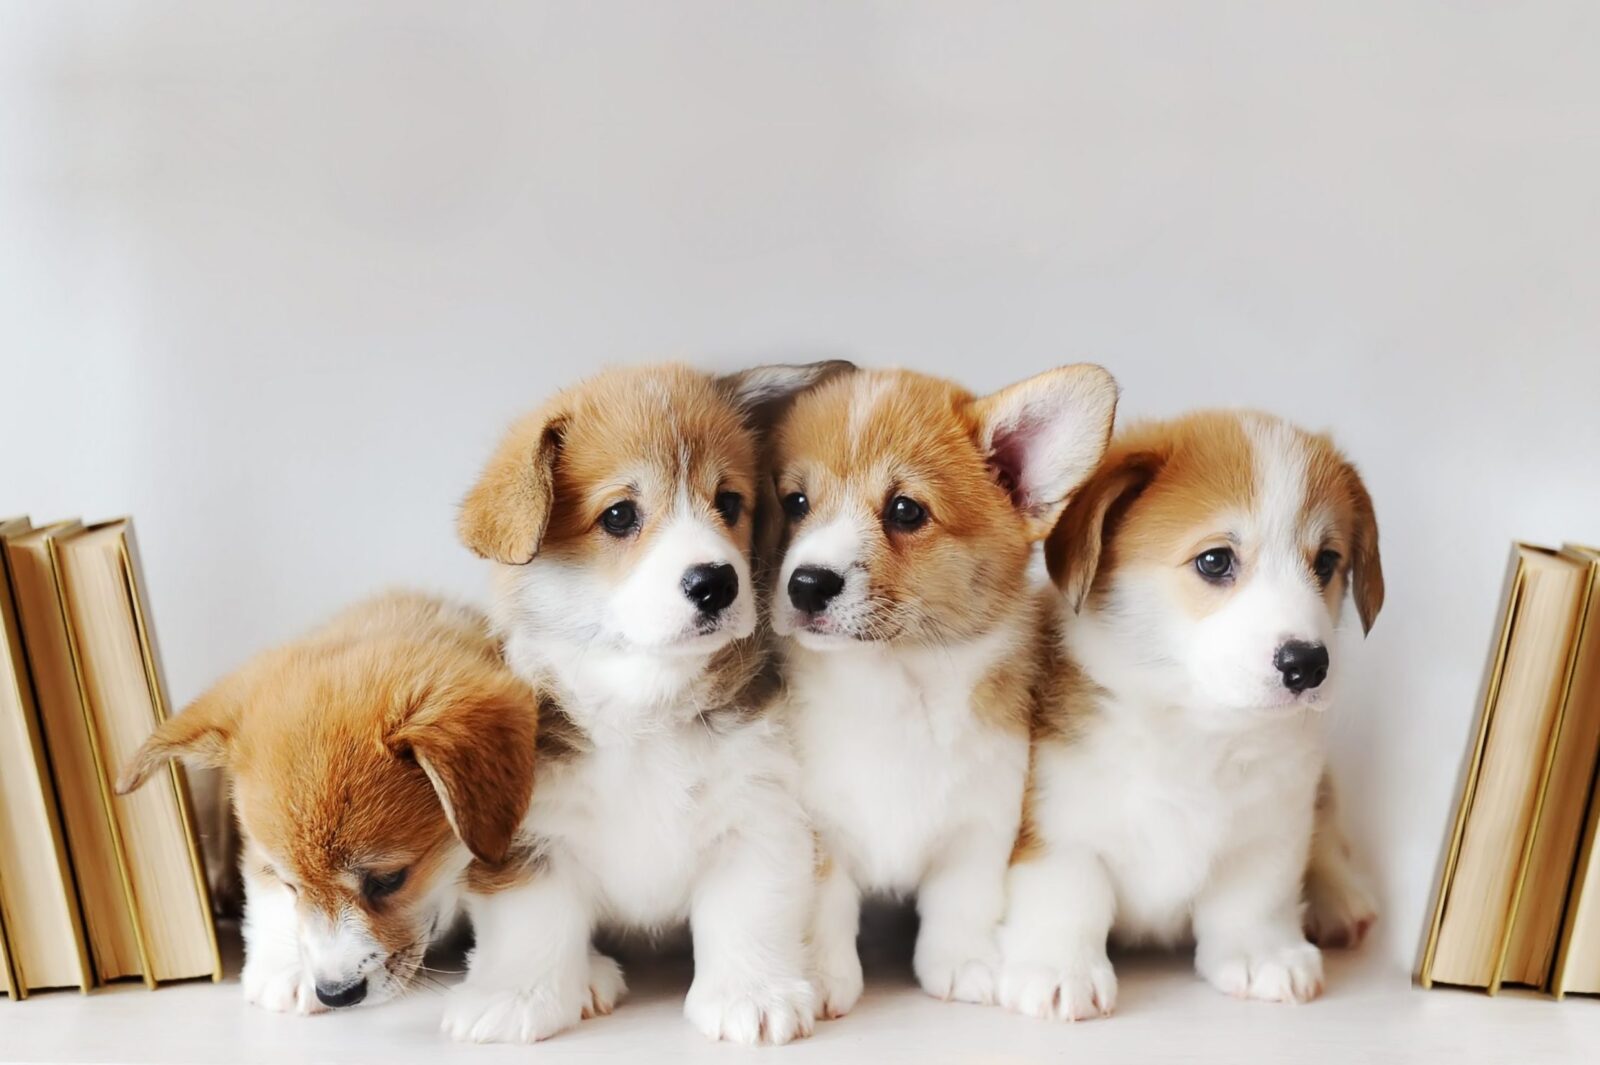 Can You Pass This General Knowledge Quiz While Being Distracted by Cute Puppies? Cute Dog Puppy 10